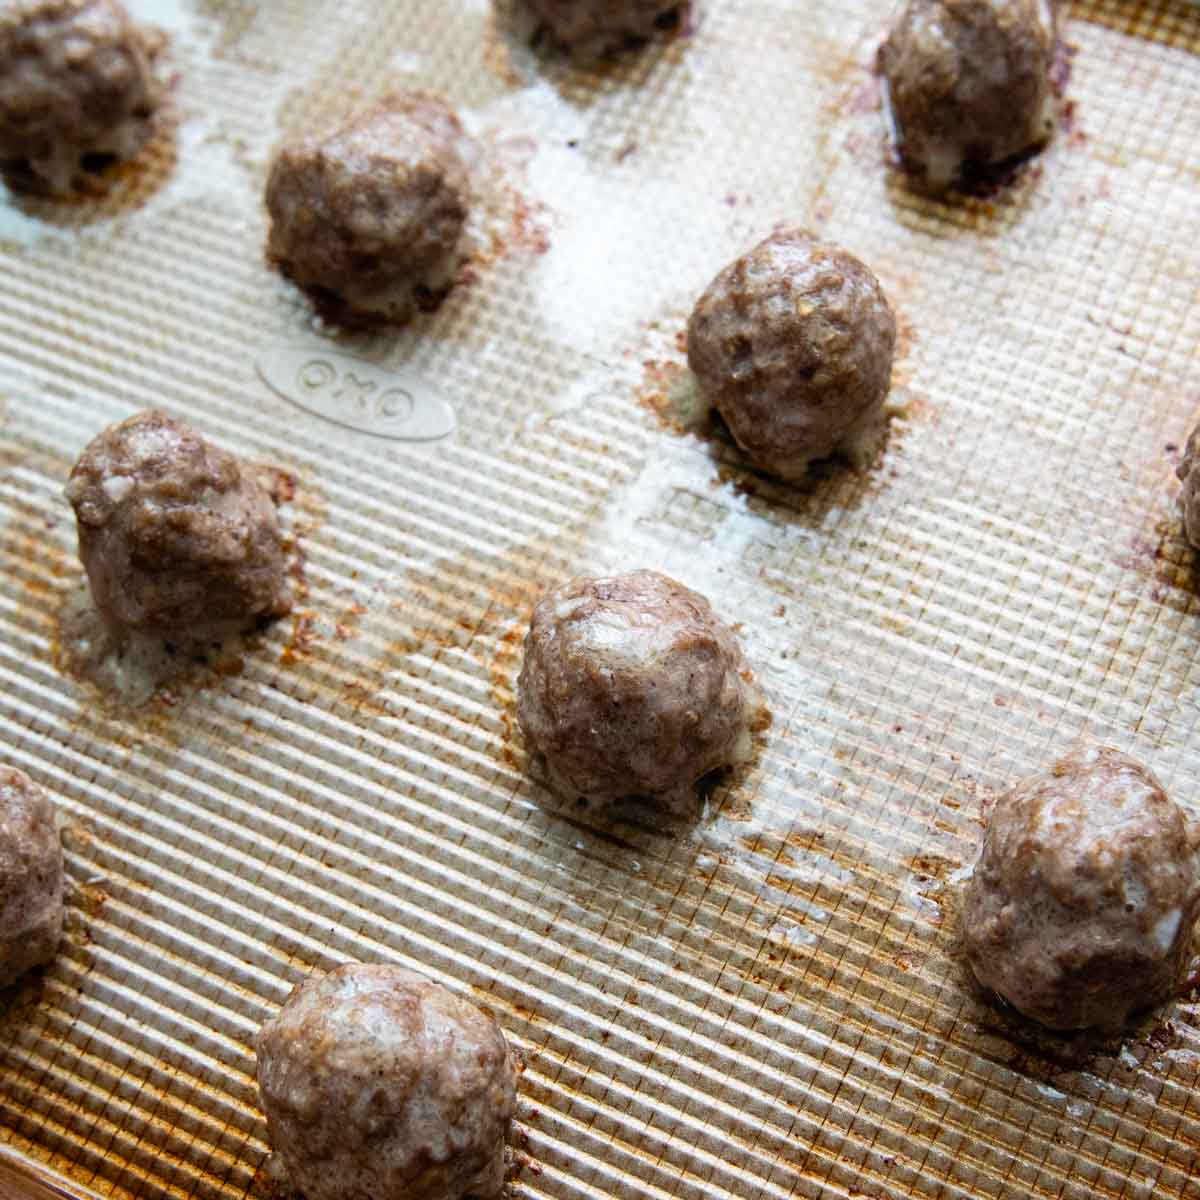 meatballs browned on a baking sheet.